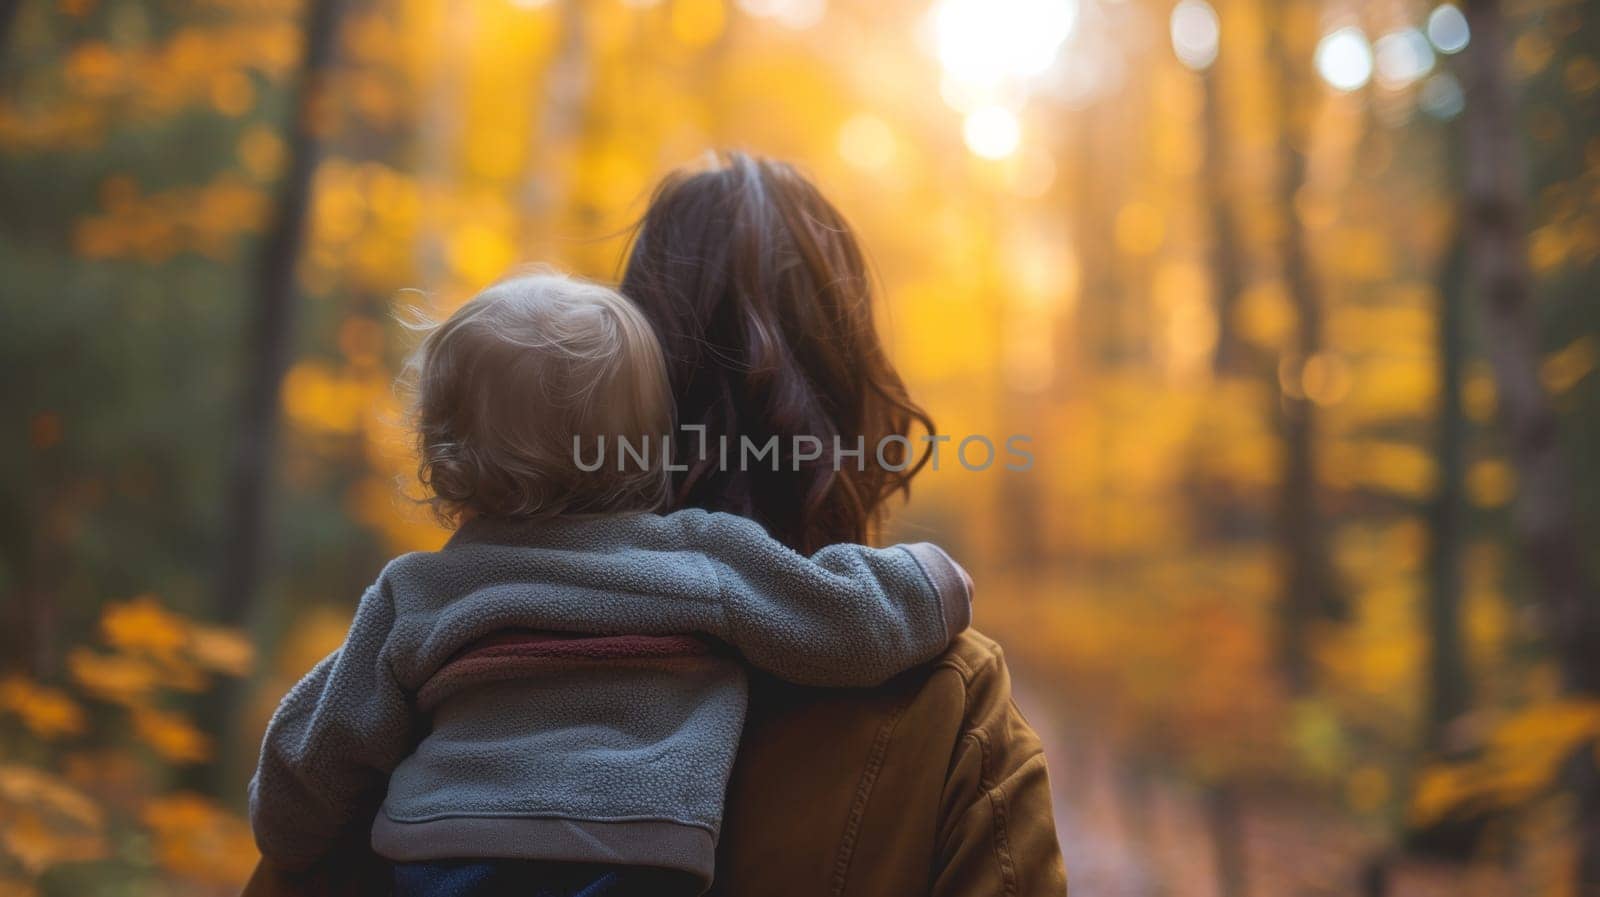 A woman holding a child in her arms walking through the woods